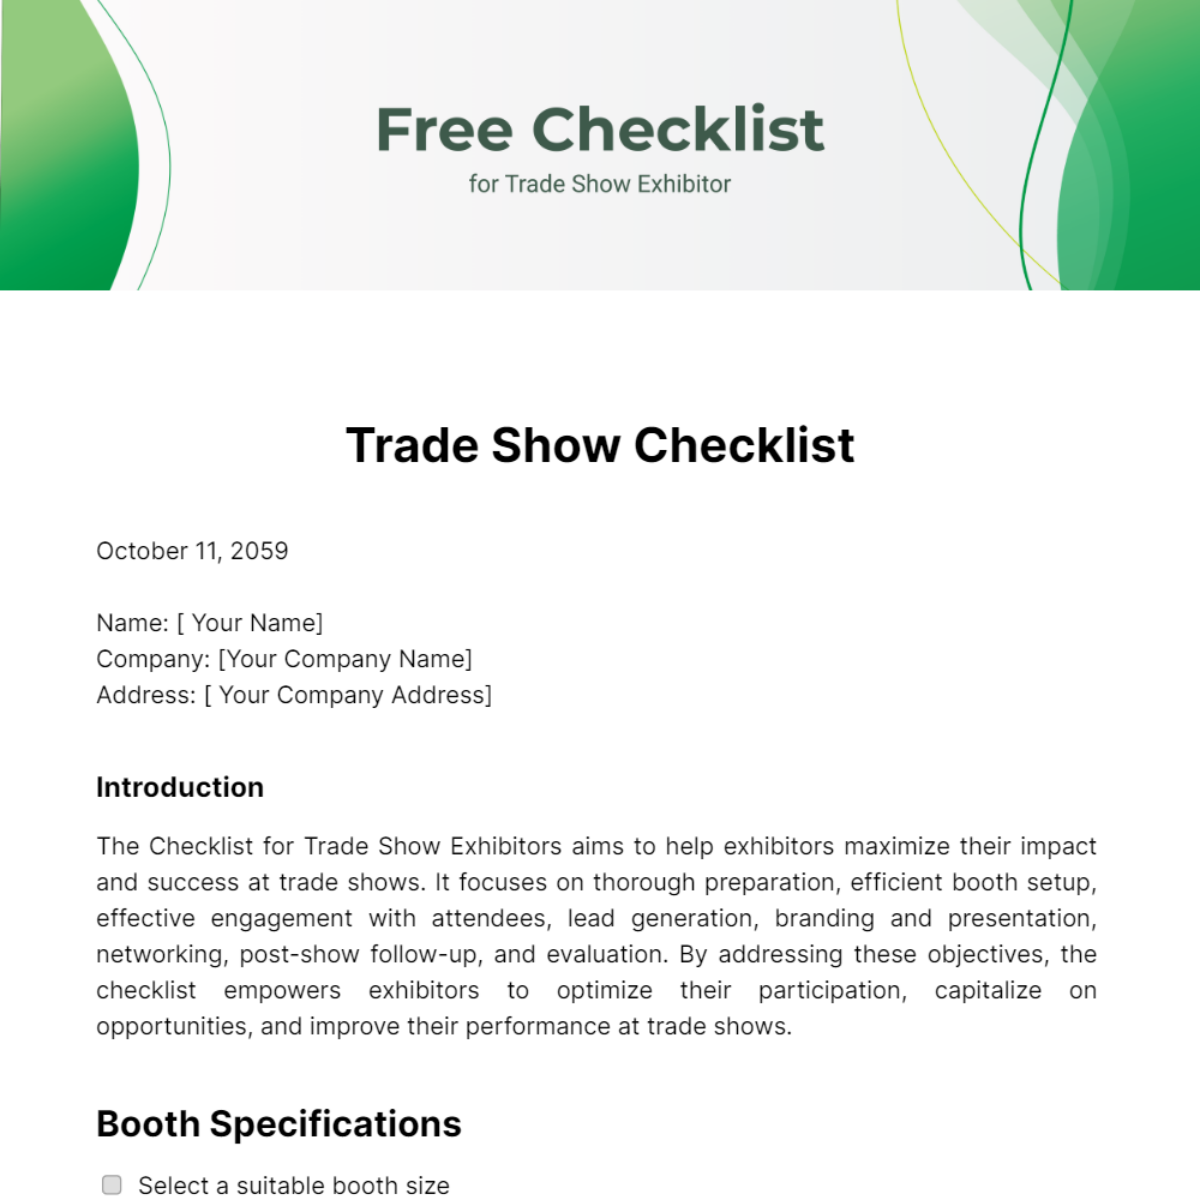 Free Checklist for Trade Show Exhibitor Template